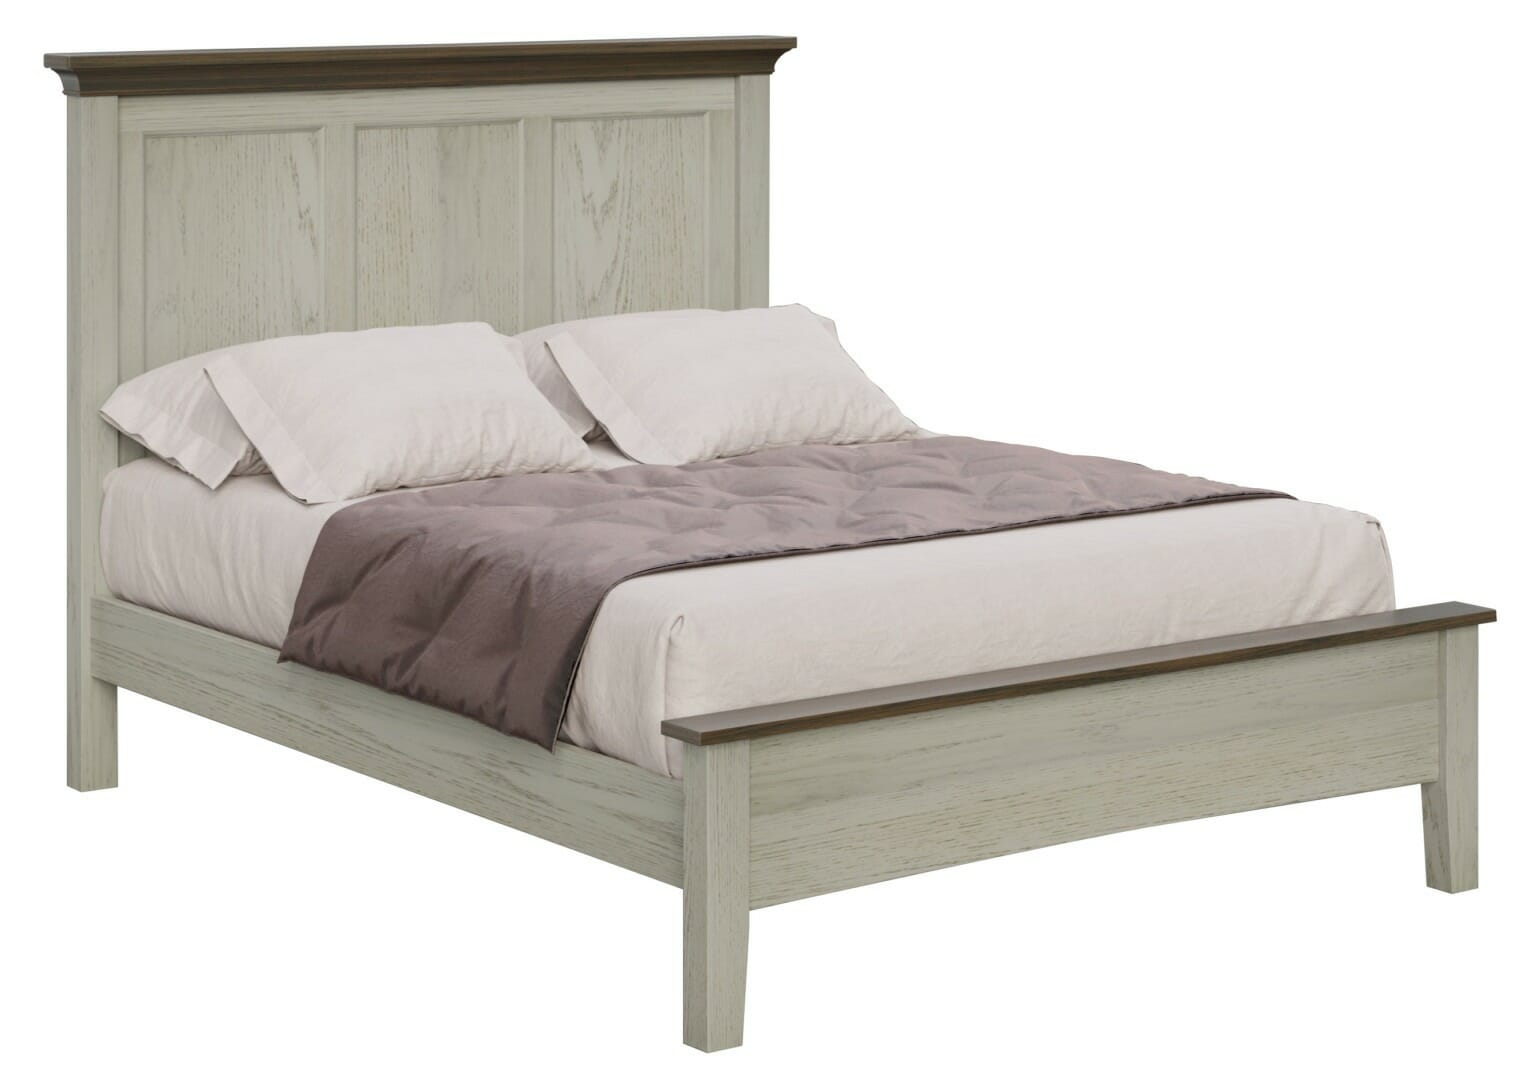 TR42002 Amish Hickory Grove Panel Bed | Unfinished Furniture of Wilmington